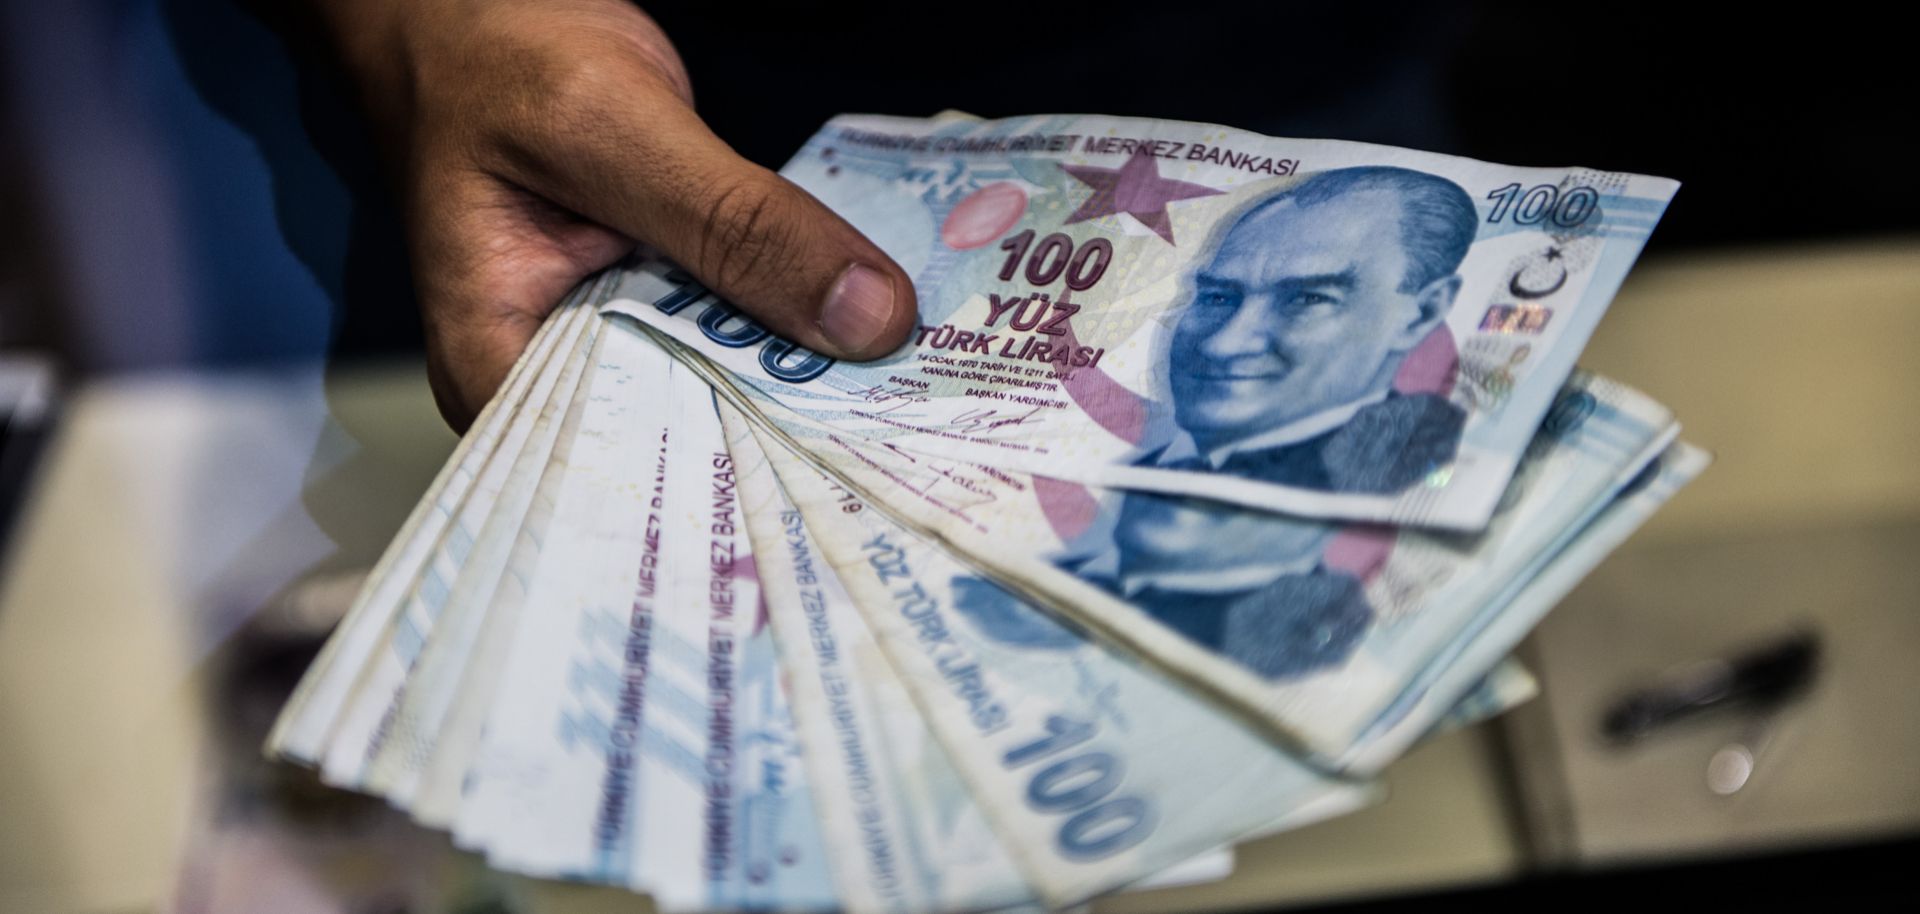 A teller holds Turkish lira banknotes at a currency exchange office in Istanbul on Aug. 13, 2018.